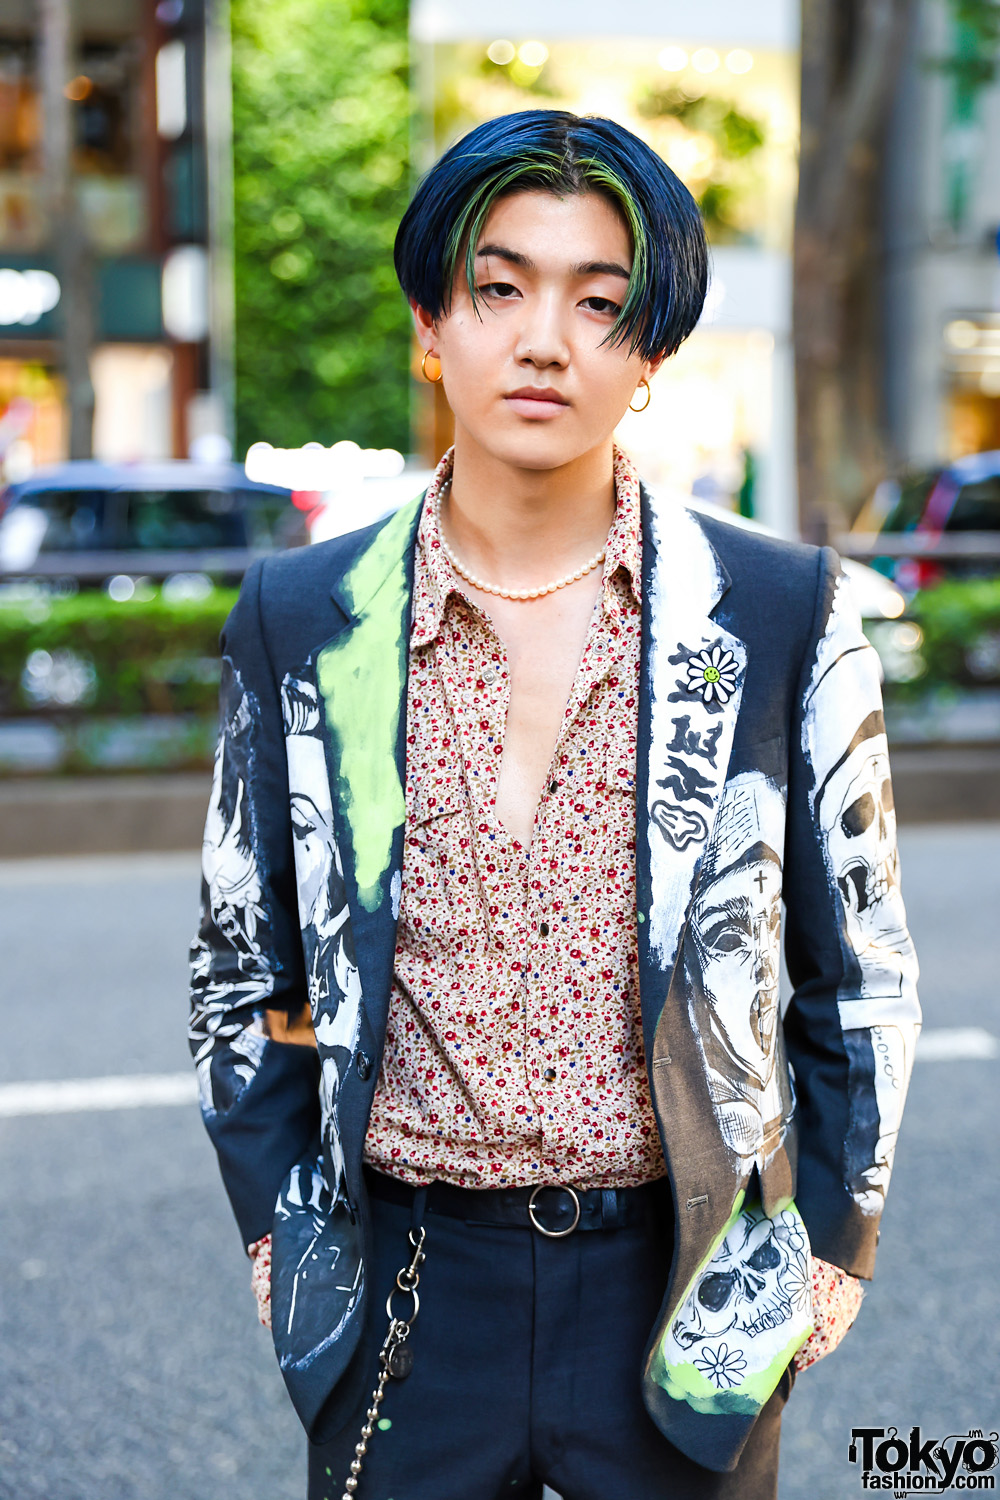 Remake Suit Style w/ Blue Green Hair, Pearl Necklace, Hand-Painted Suit ...